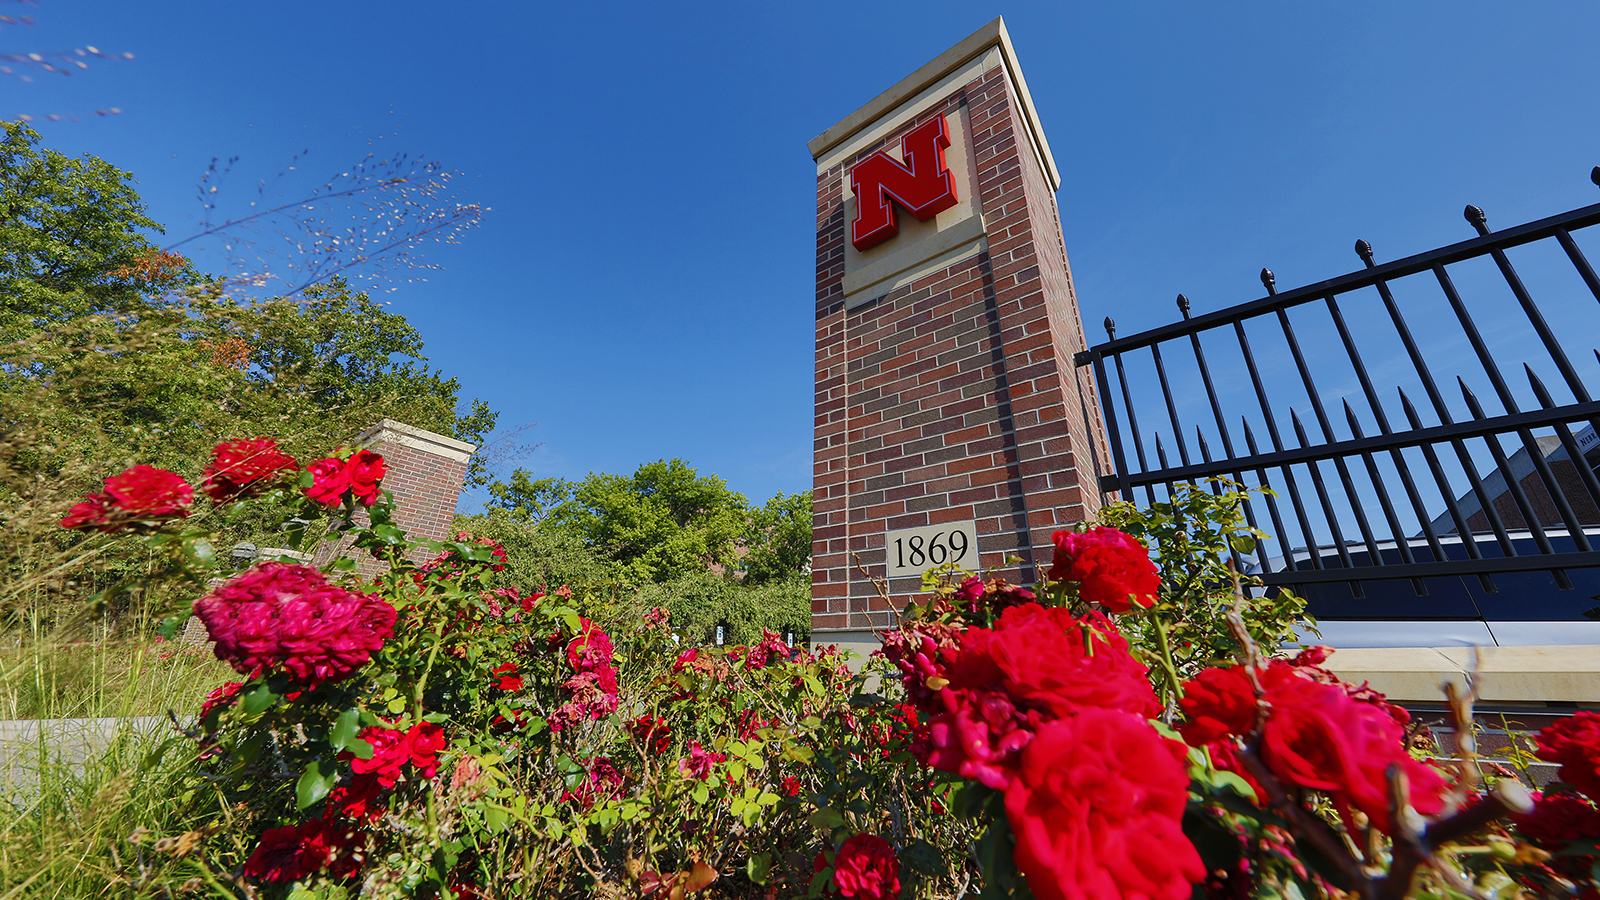 East Campus gateway with Nebraska N on pilar and red flowers in foreground